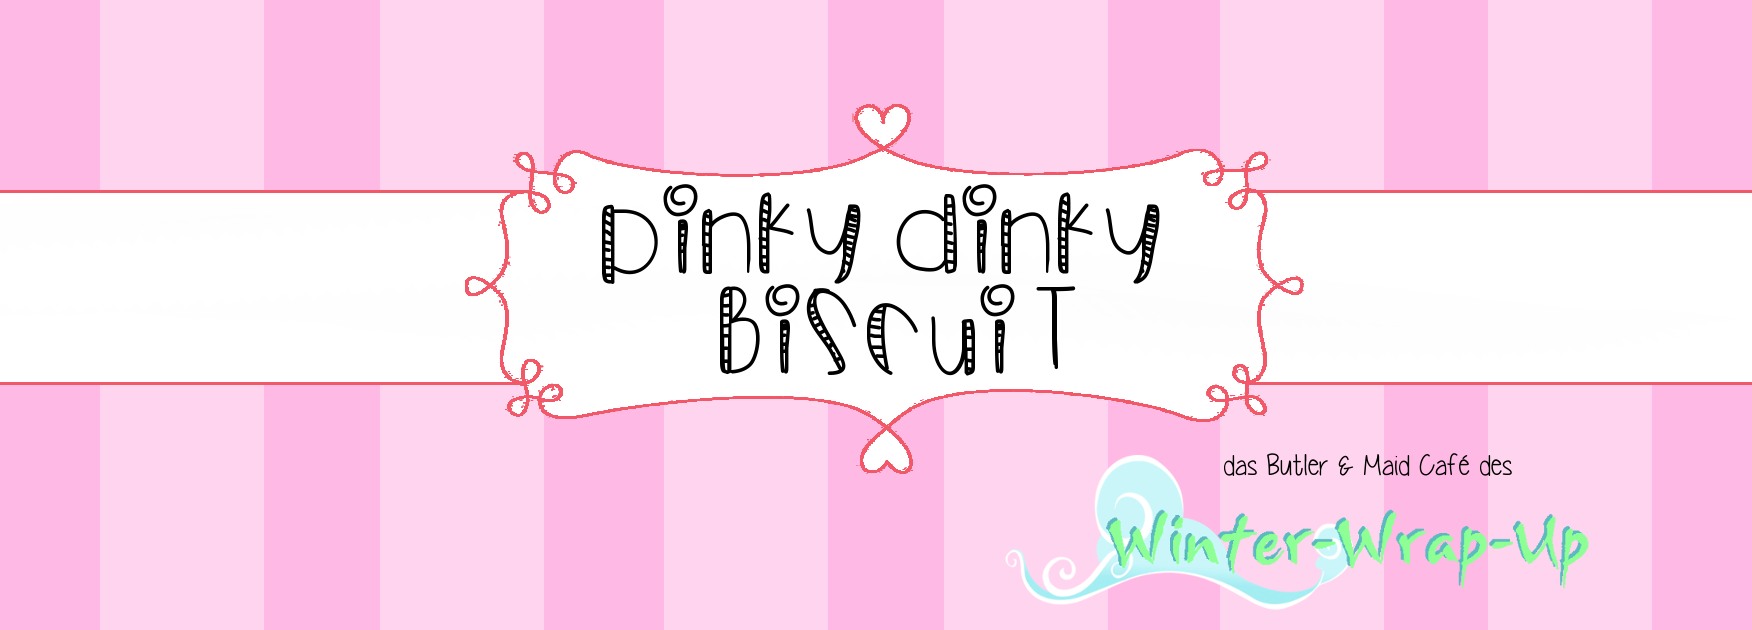 [Bild: pinky-dinky-bisquit-e1415957848544.png]